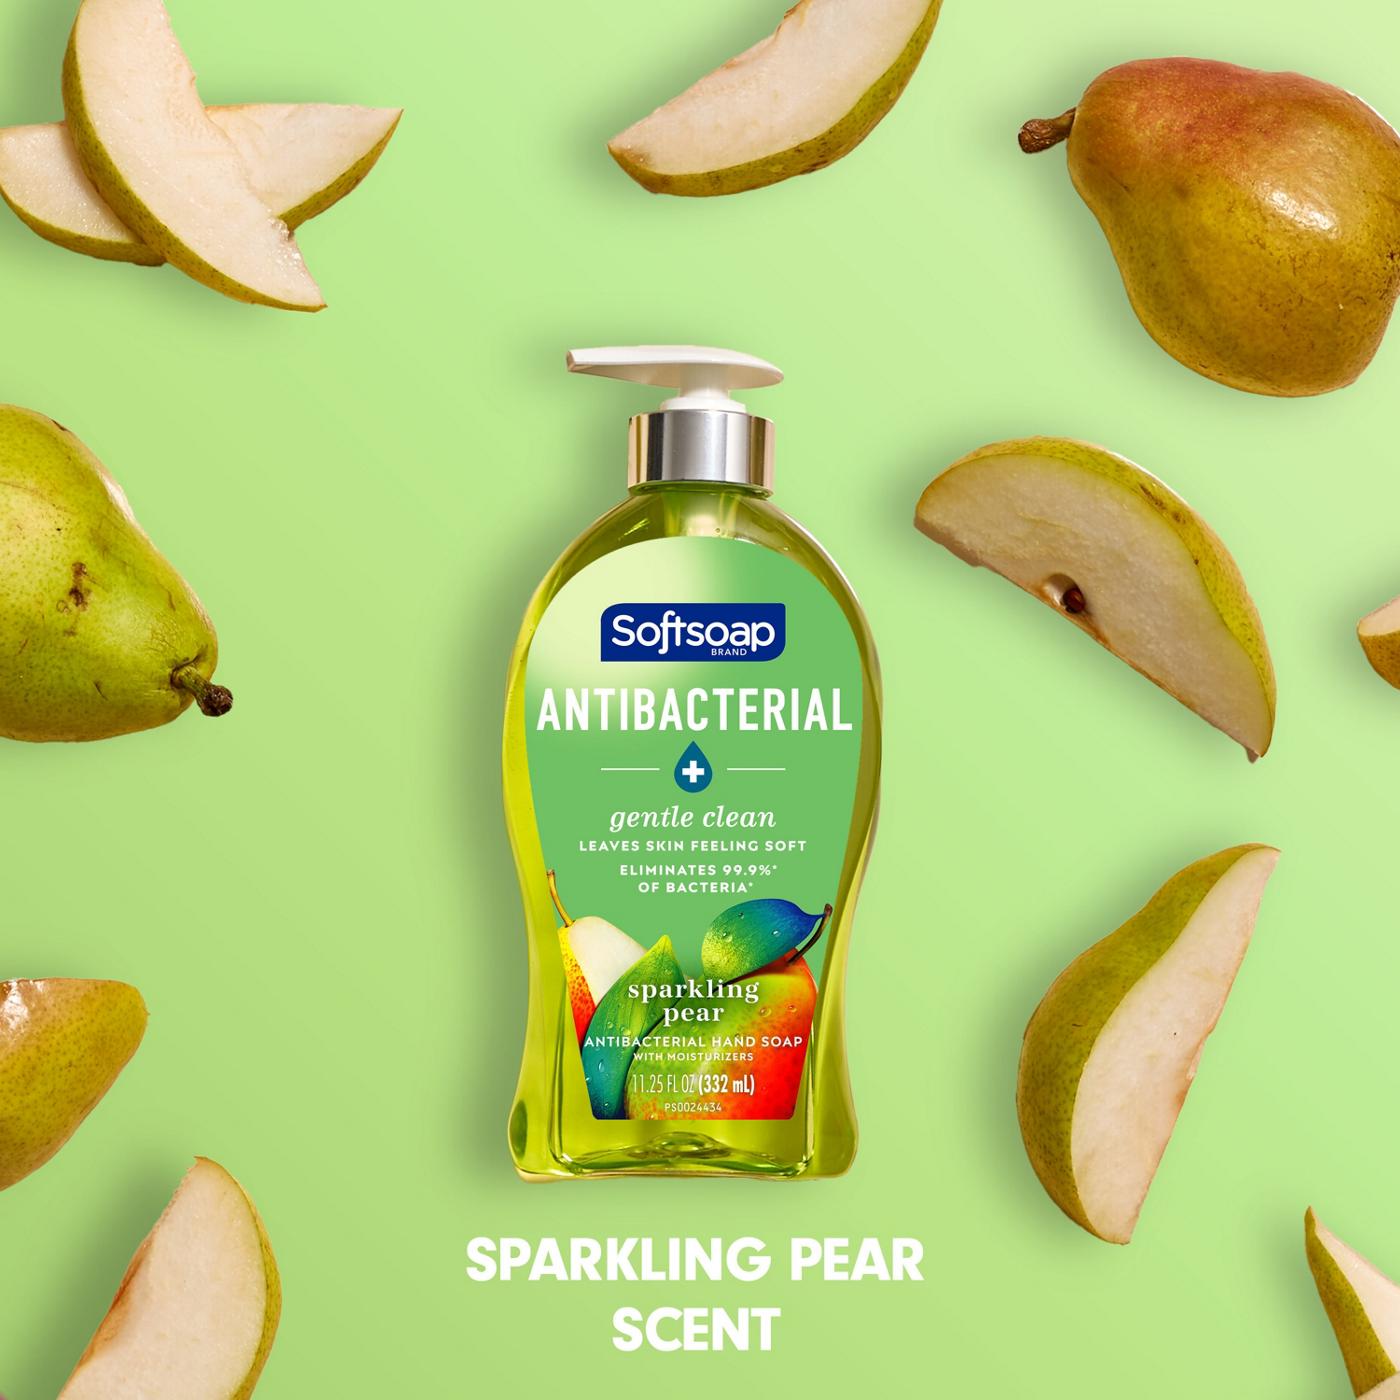 Softsoap Antibacterial Hand Soap - Sparkling Pear; image 2 of 4